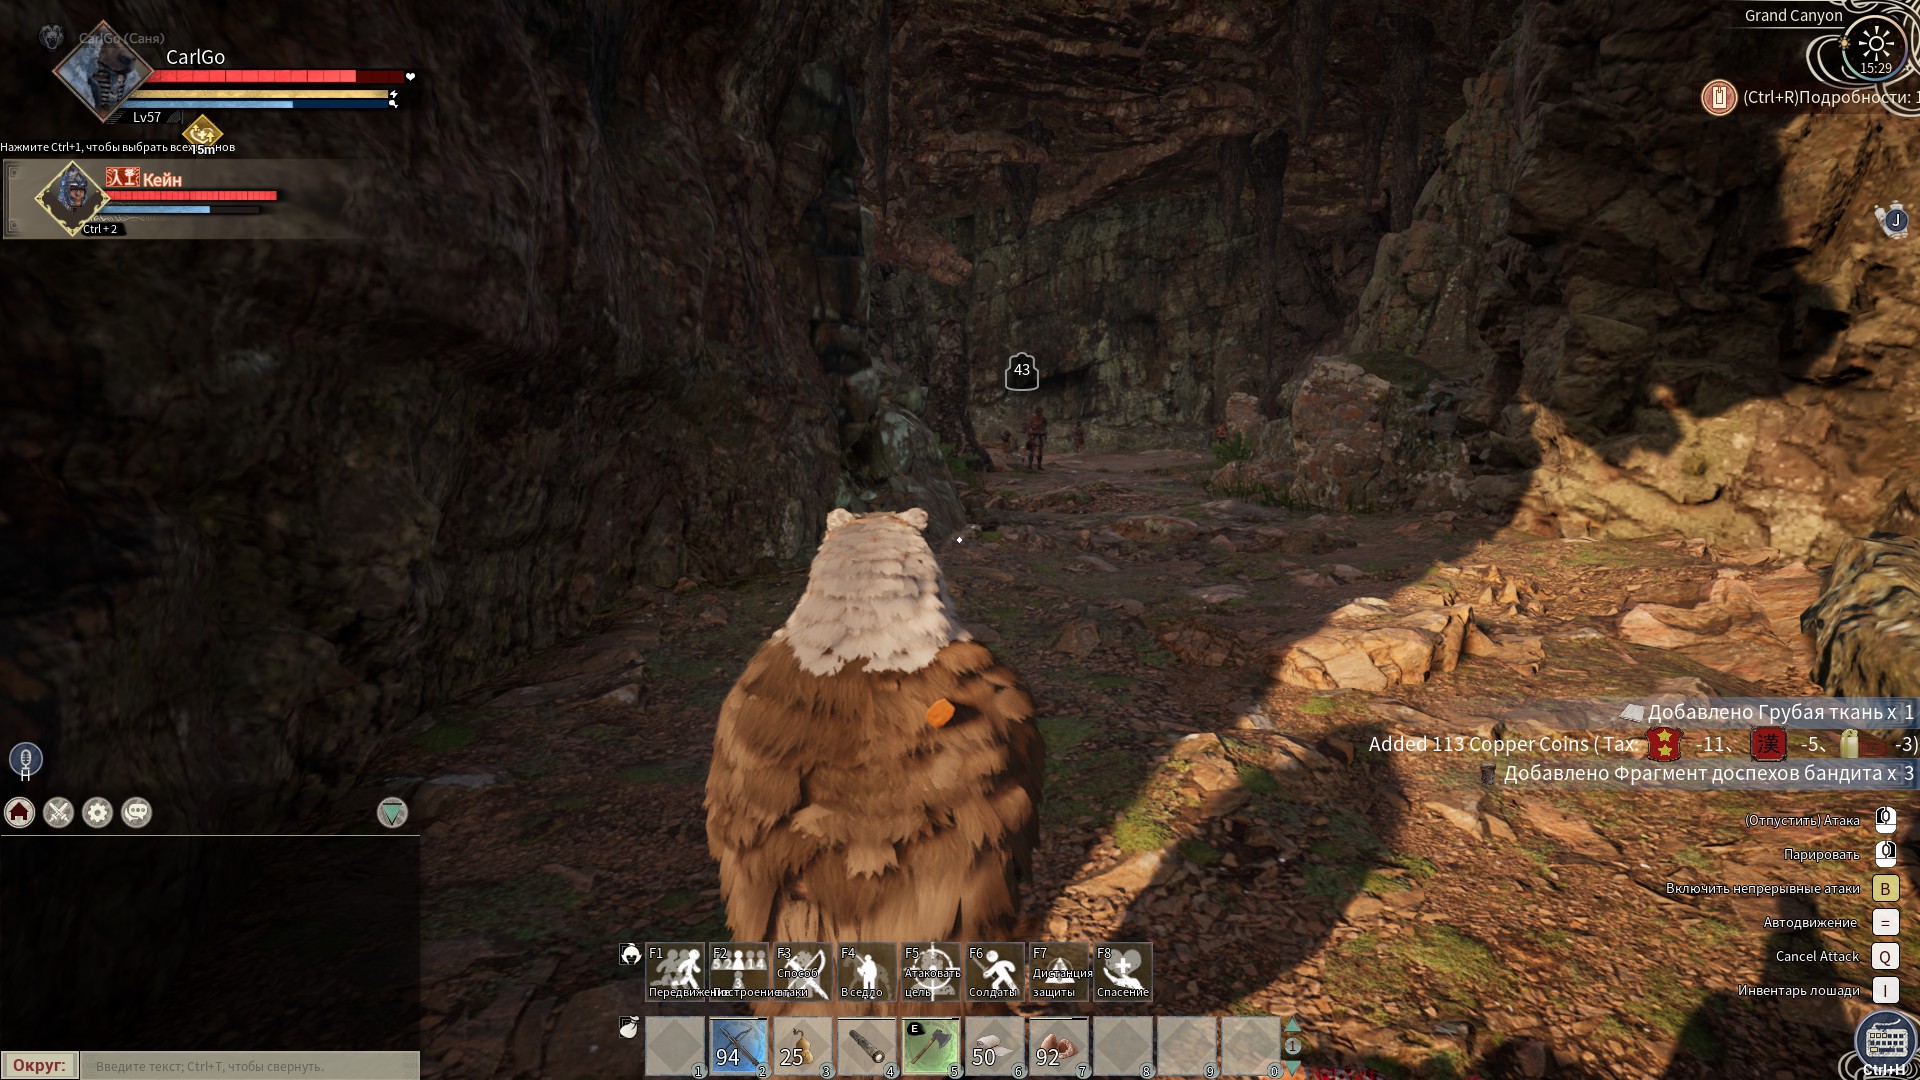 : /Locations: Cave image 44